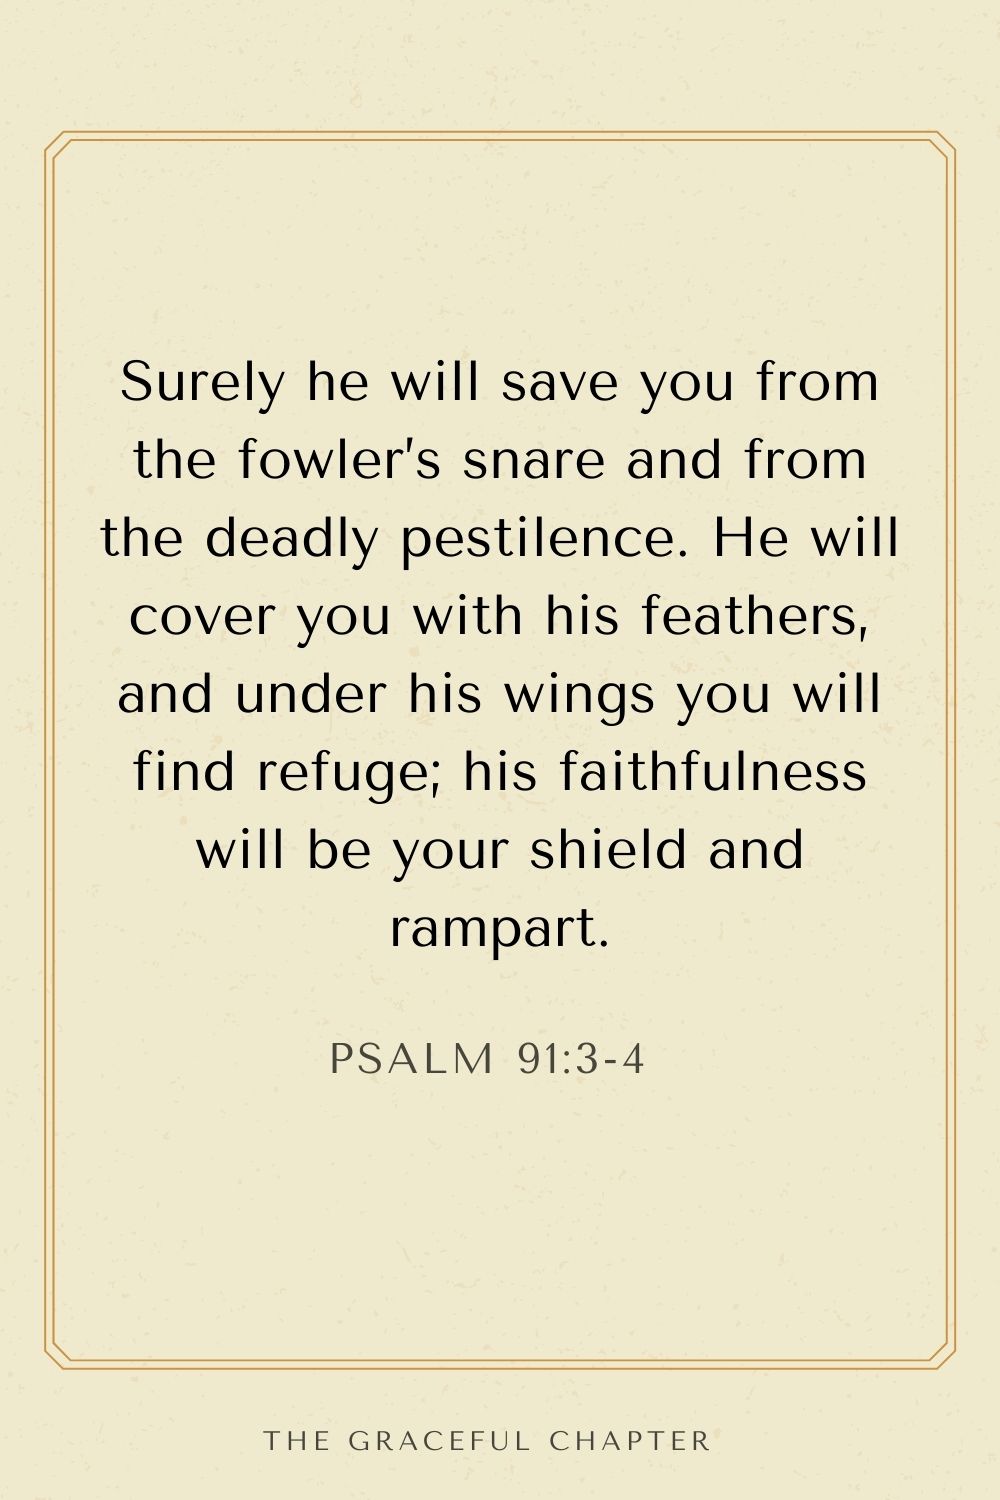 Surely he will save you from the fowler’s snare and from the deadly pestilence. He will cover you with his feathers, and under his wings you will find refuge; his faithfulness will be your shield and rampart. Psalm 91:3-4